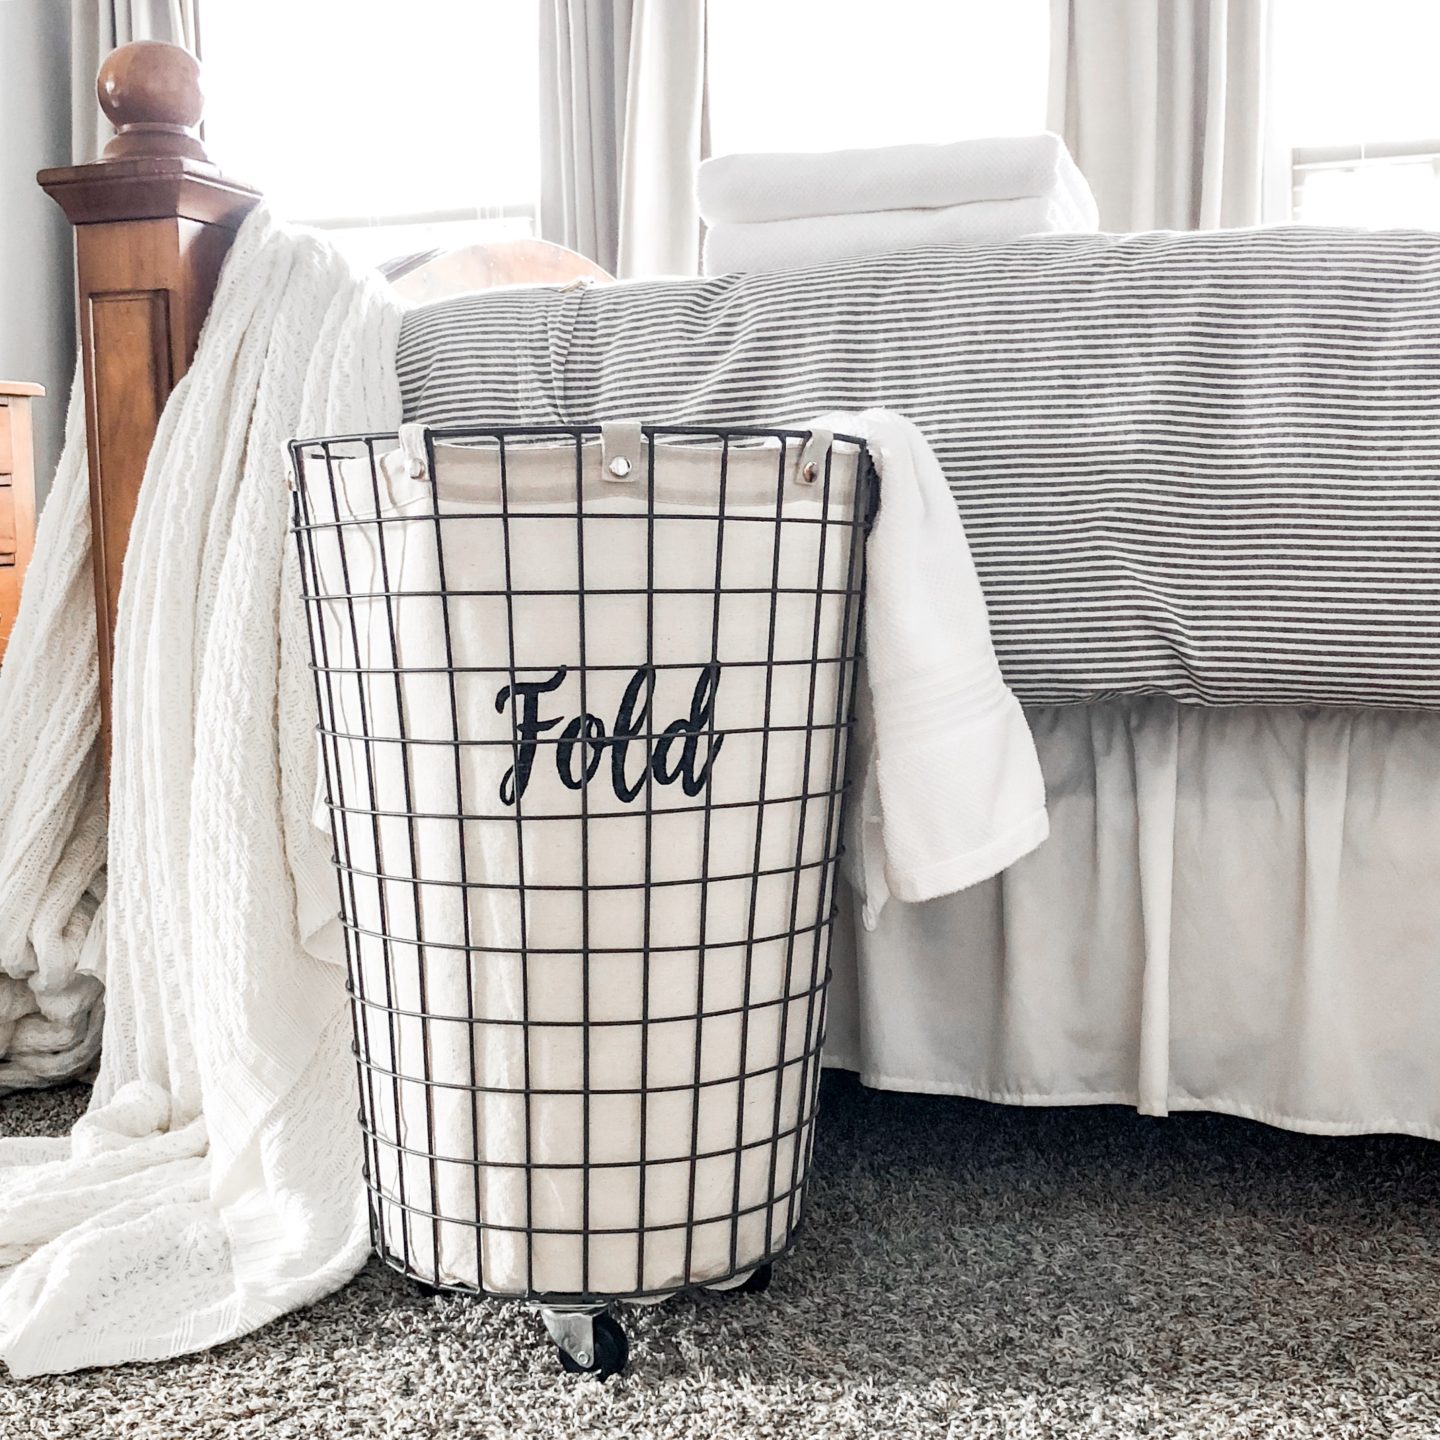 How To DIY Screen Printing | Making Your Own Laundry Basket Labels!